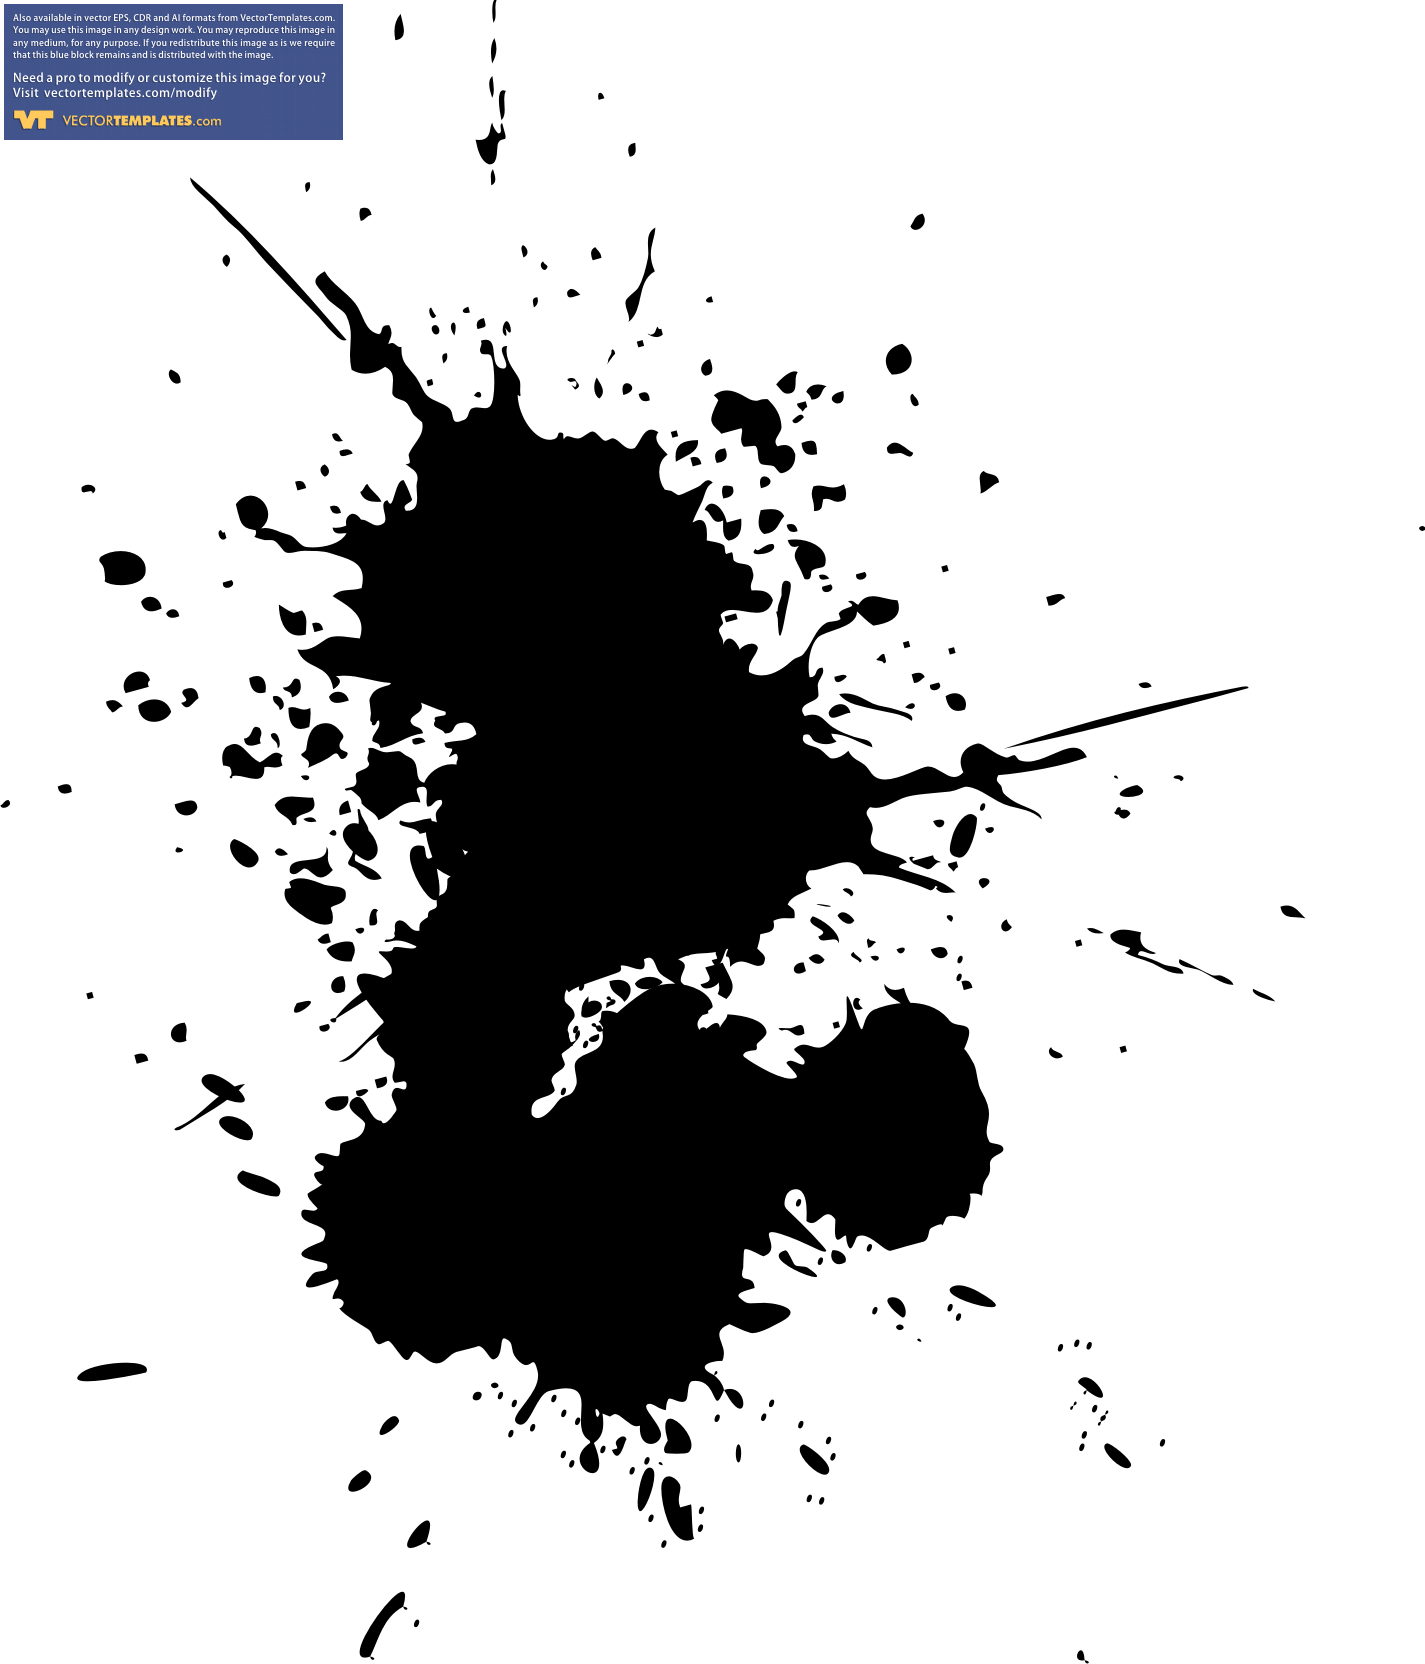 Ink Splats and Grunges